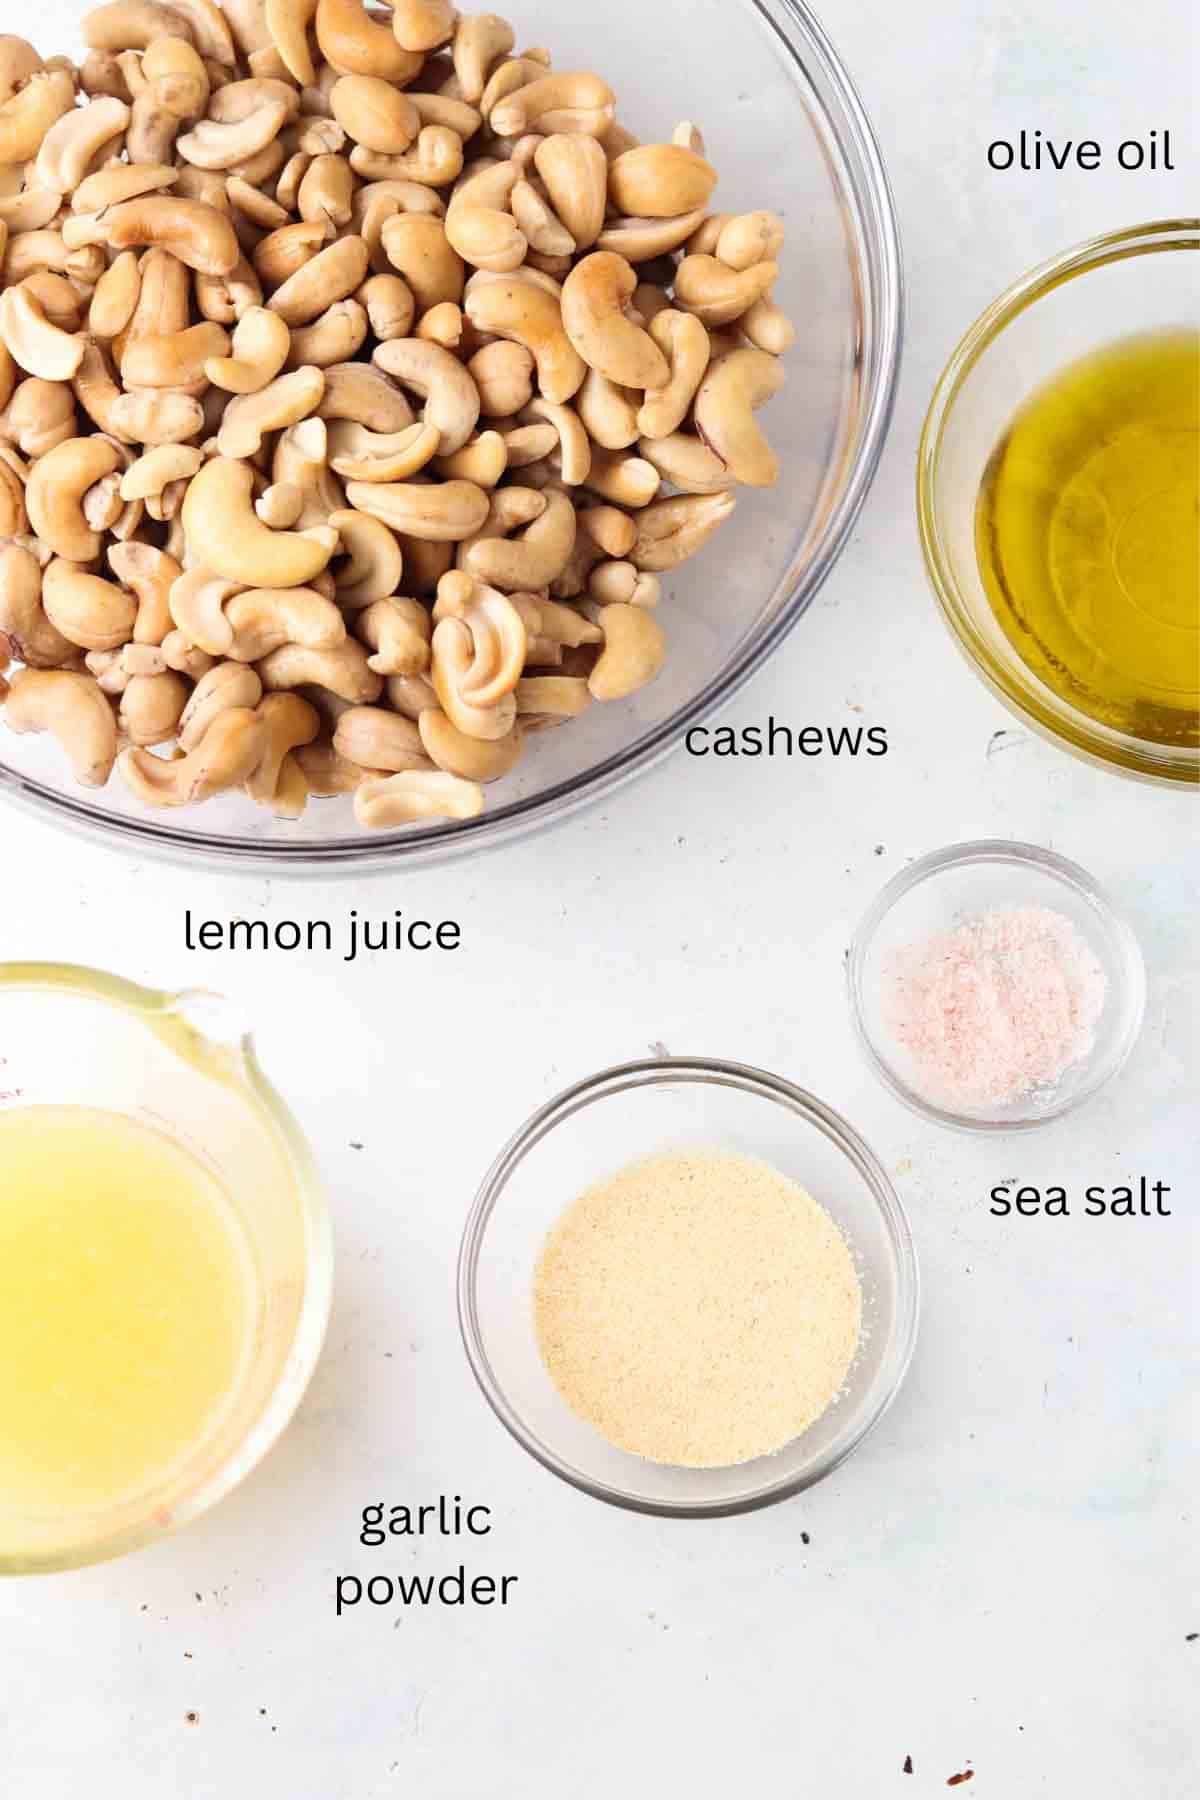 Cashew cheese ingredients laid out in small glass bowls on a counter top.